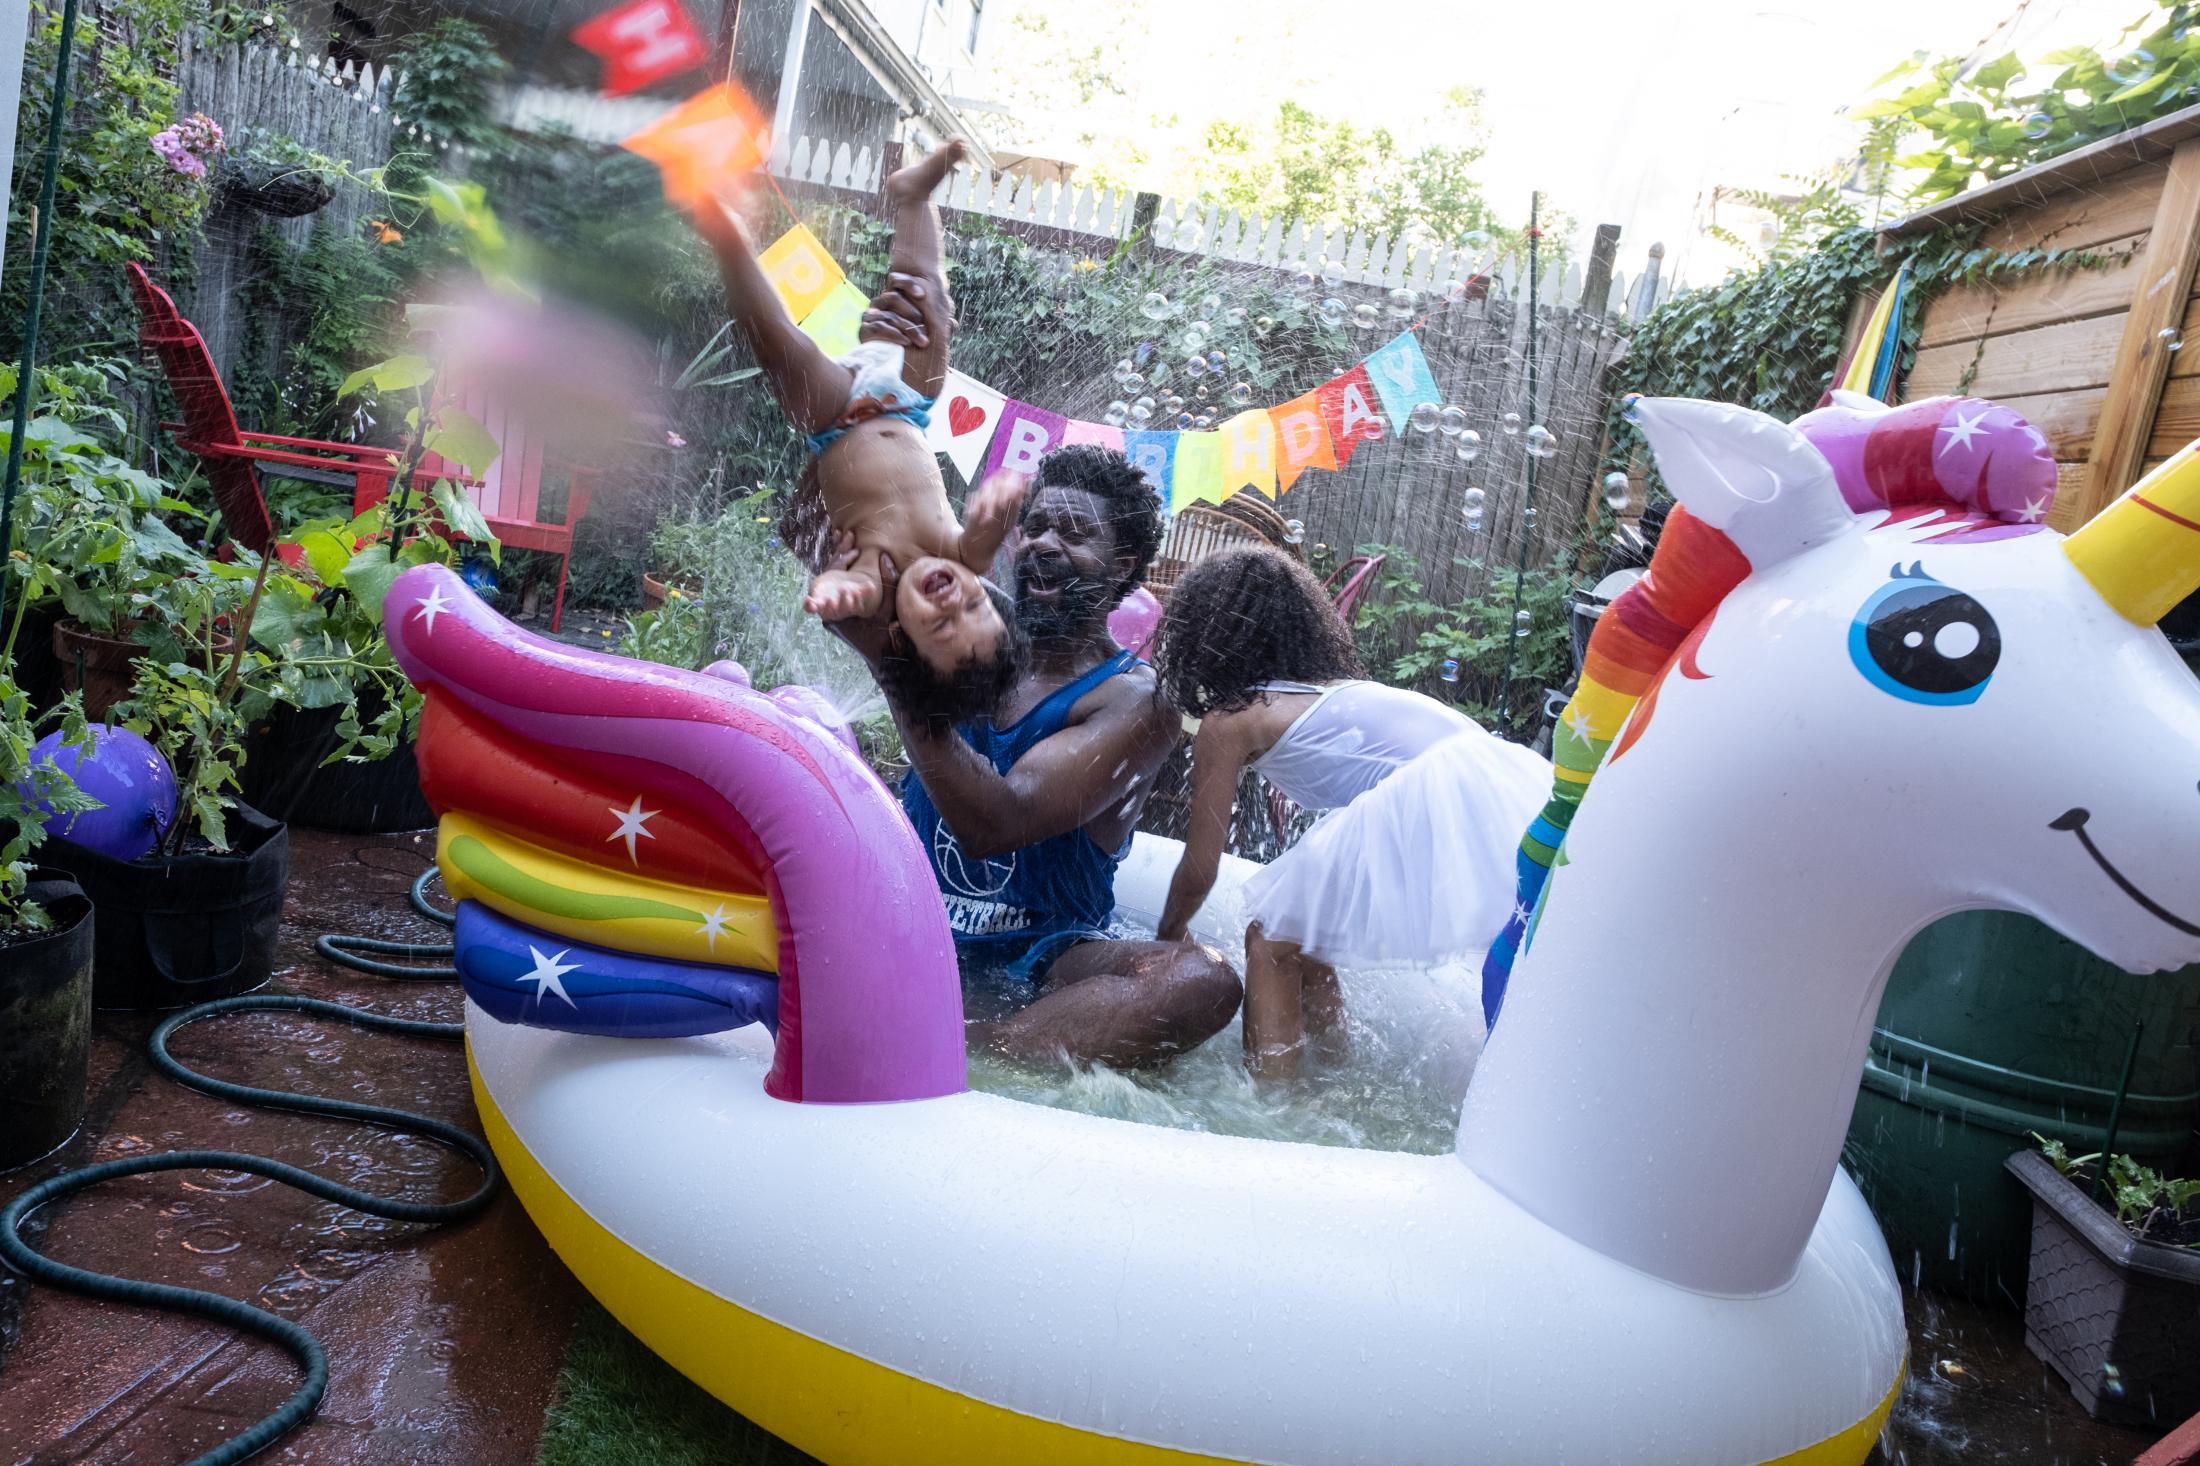 July 9, 2020: Julian is one today and we&rsquo;re celebrating fiercely with a unicorn pool and bubbles. L&eacute;a, R&eacute;gine and Kyra join us via FaceTime and my phone ends up waterlogged. 